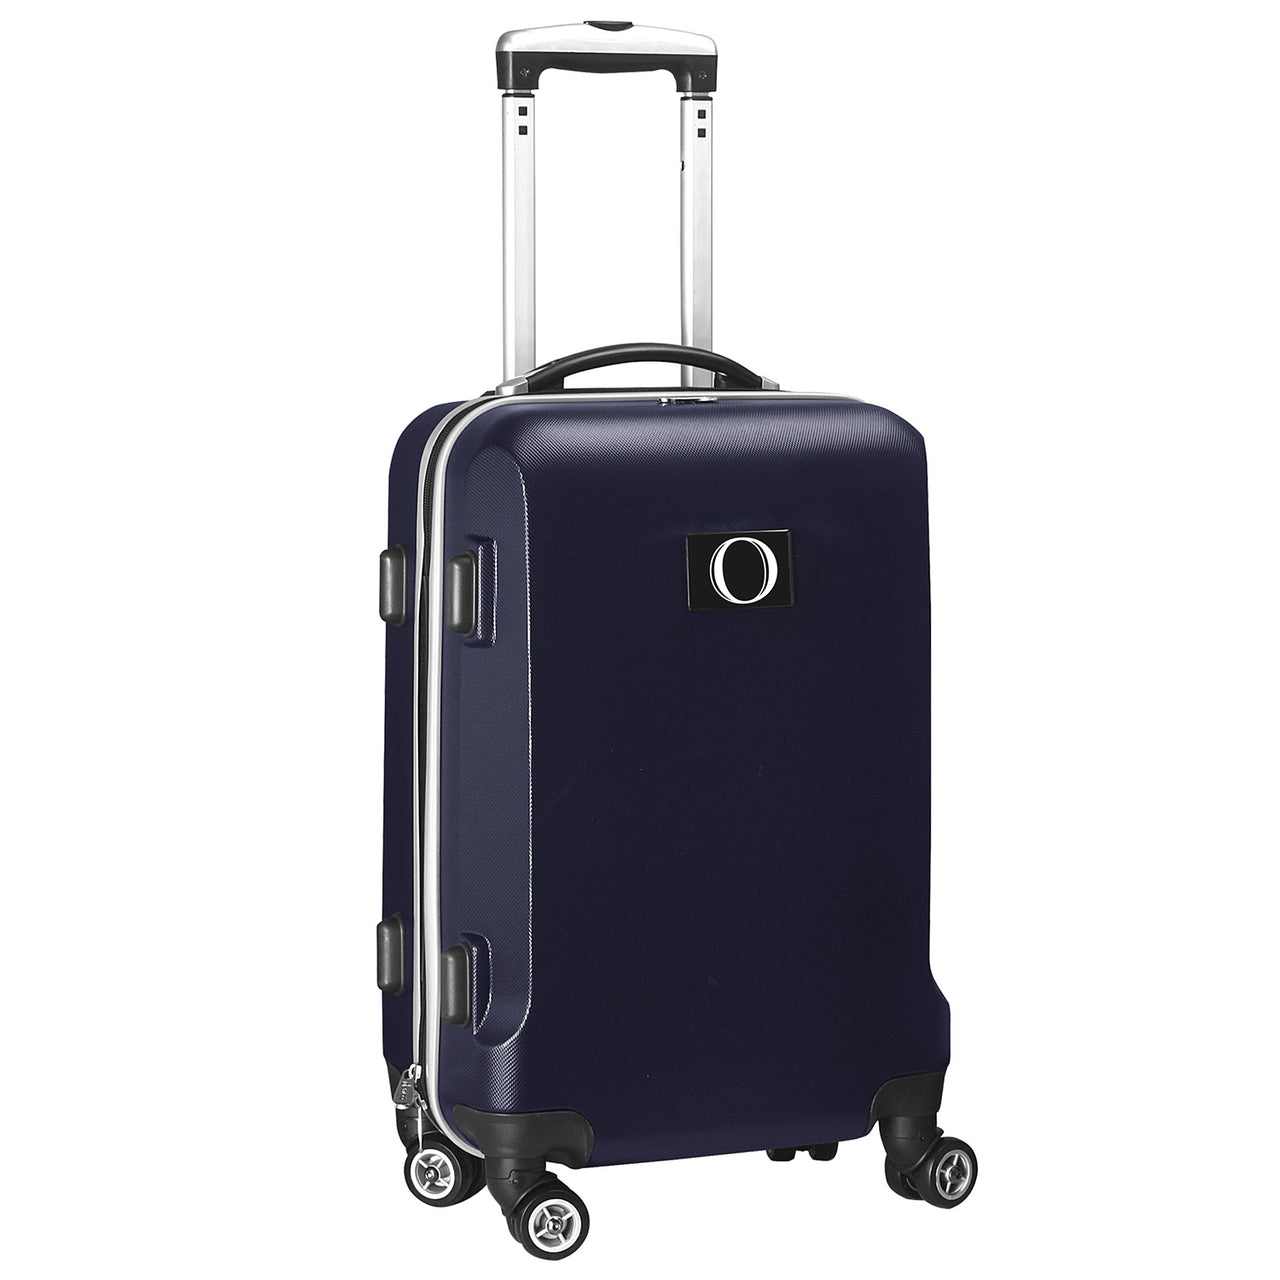 Personalized Initial Name letter "O" 20 inches Carry on Hardcase Spinner Luggage by Mojo  in NAVY